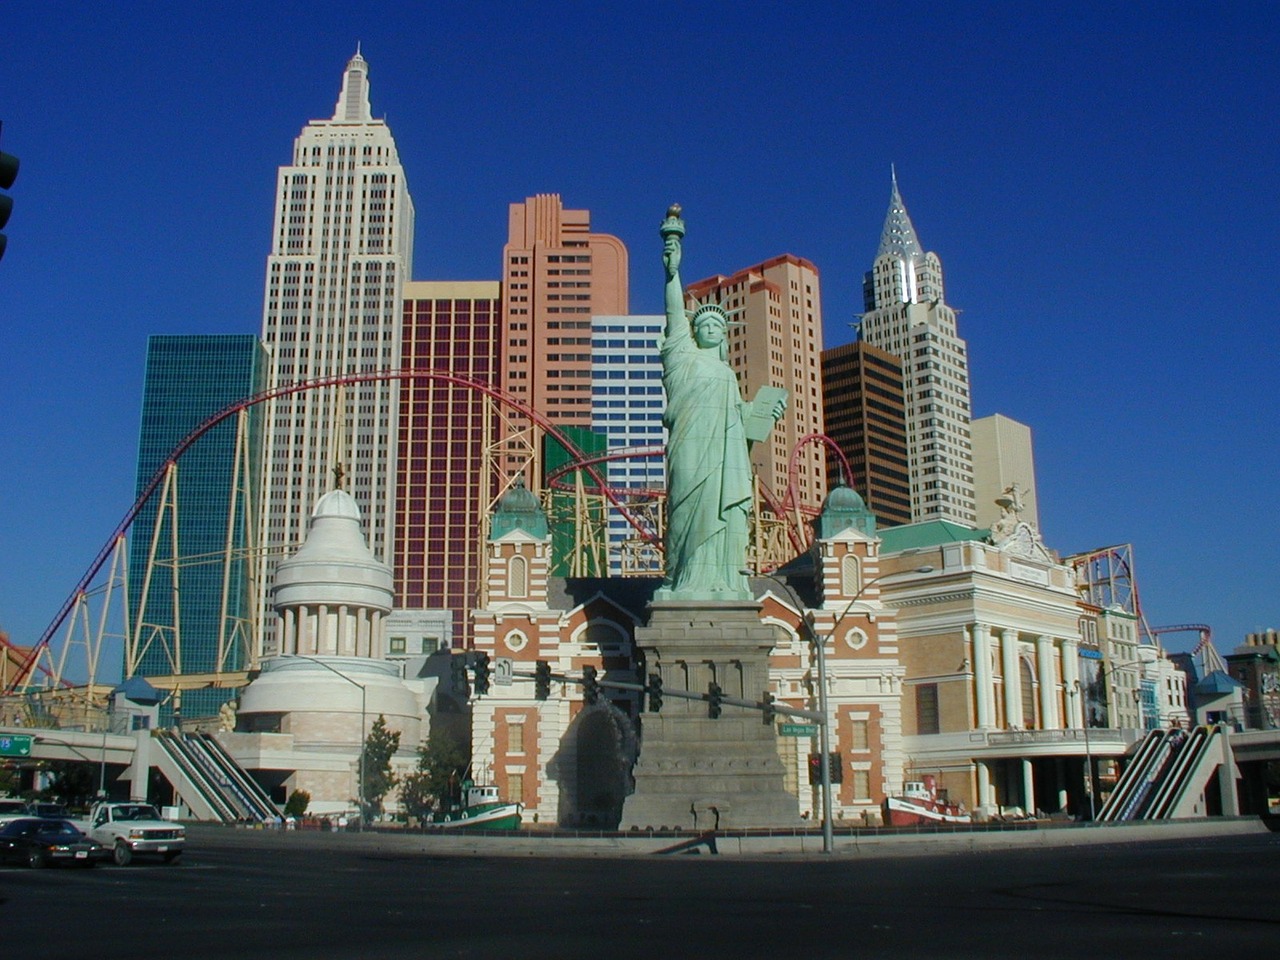 View of the Las Vegas strip with the New York casino.